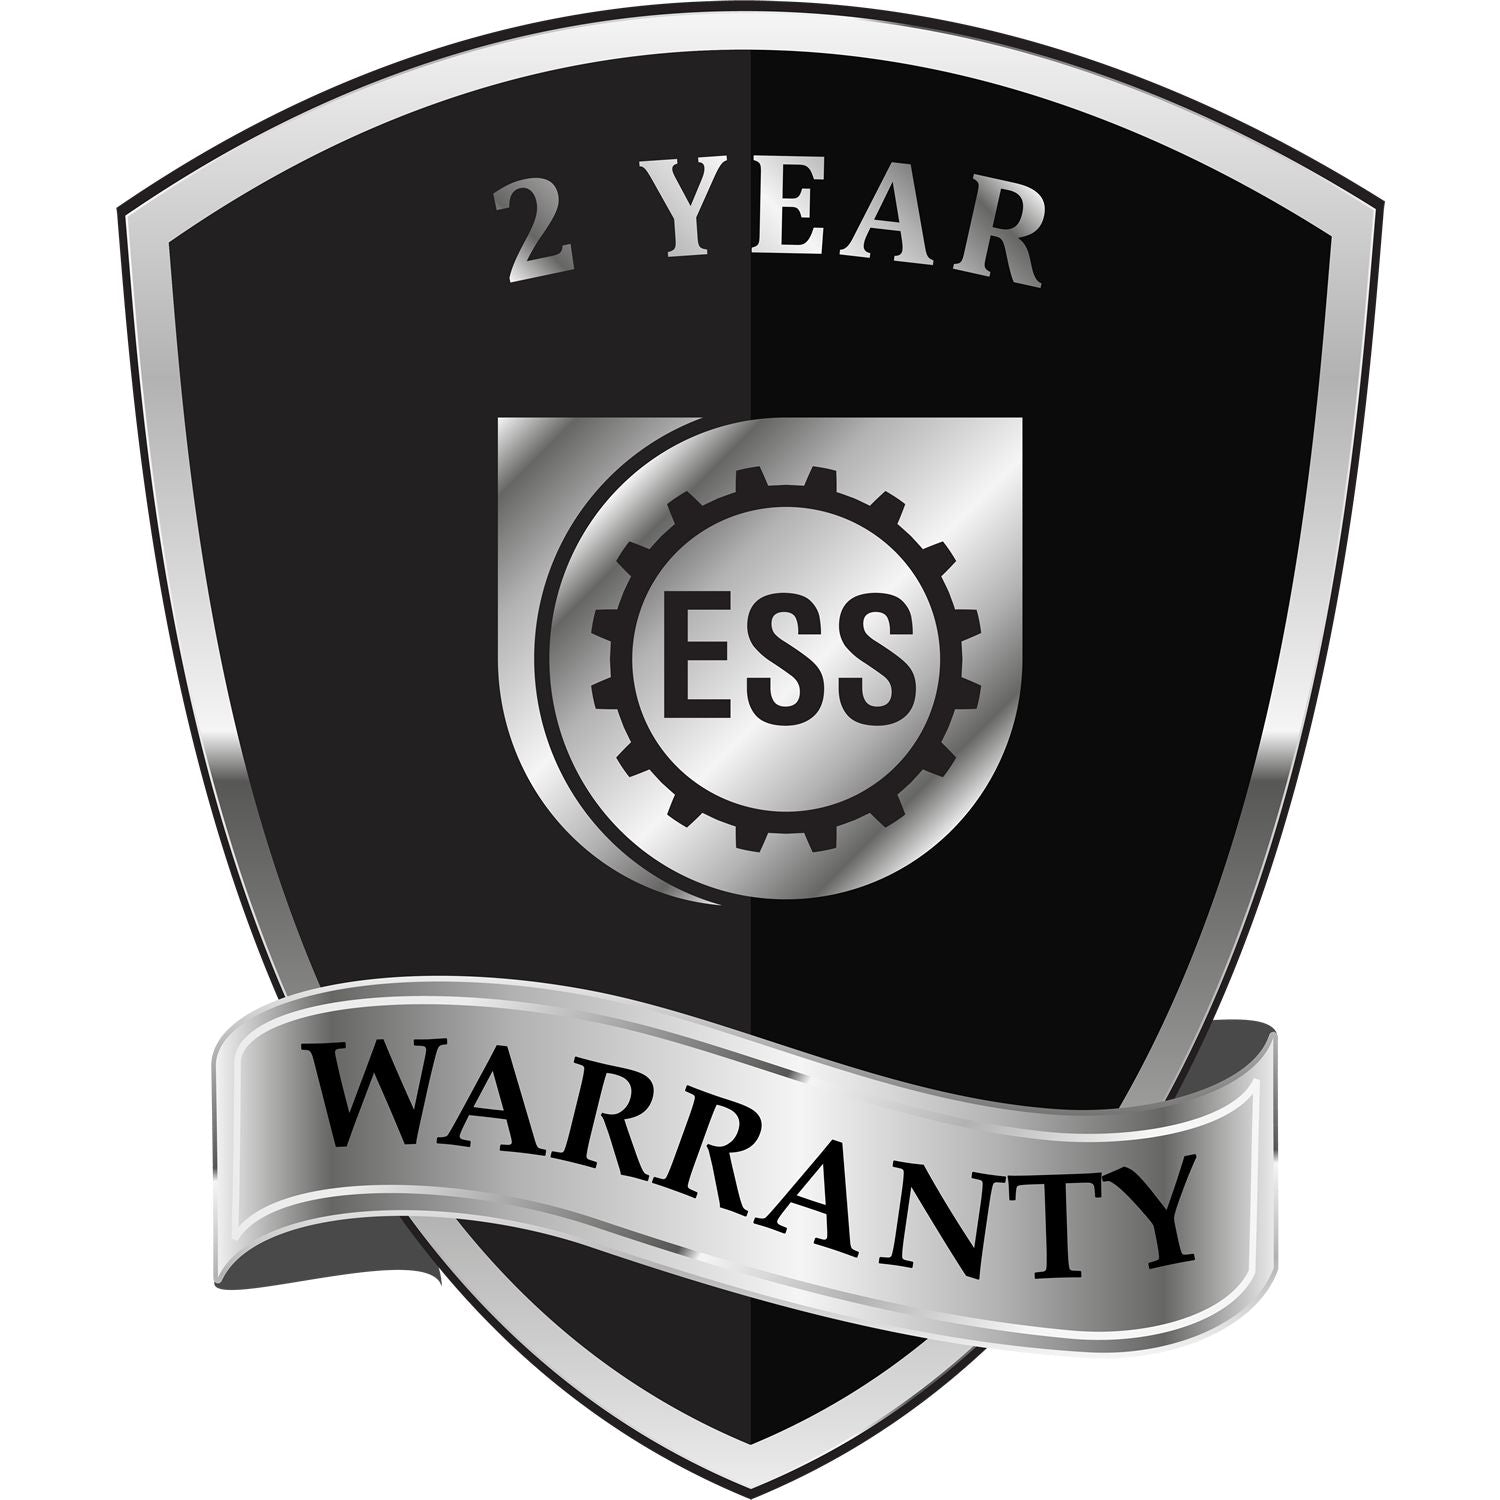 A badge or emblem showing a warranty icon for the Extended Long Reach Arkansas Architect Seal Embosser